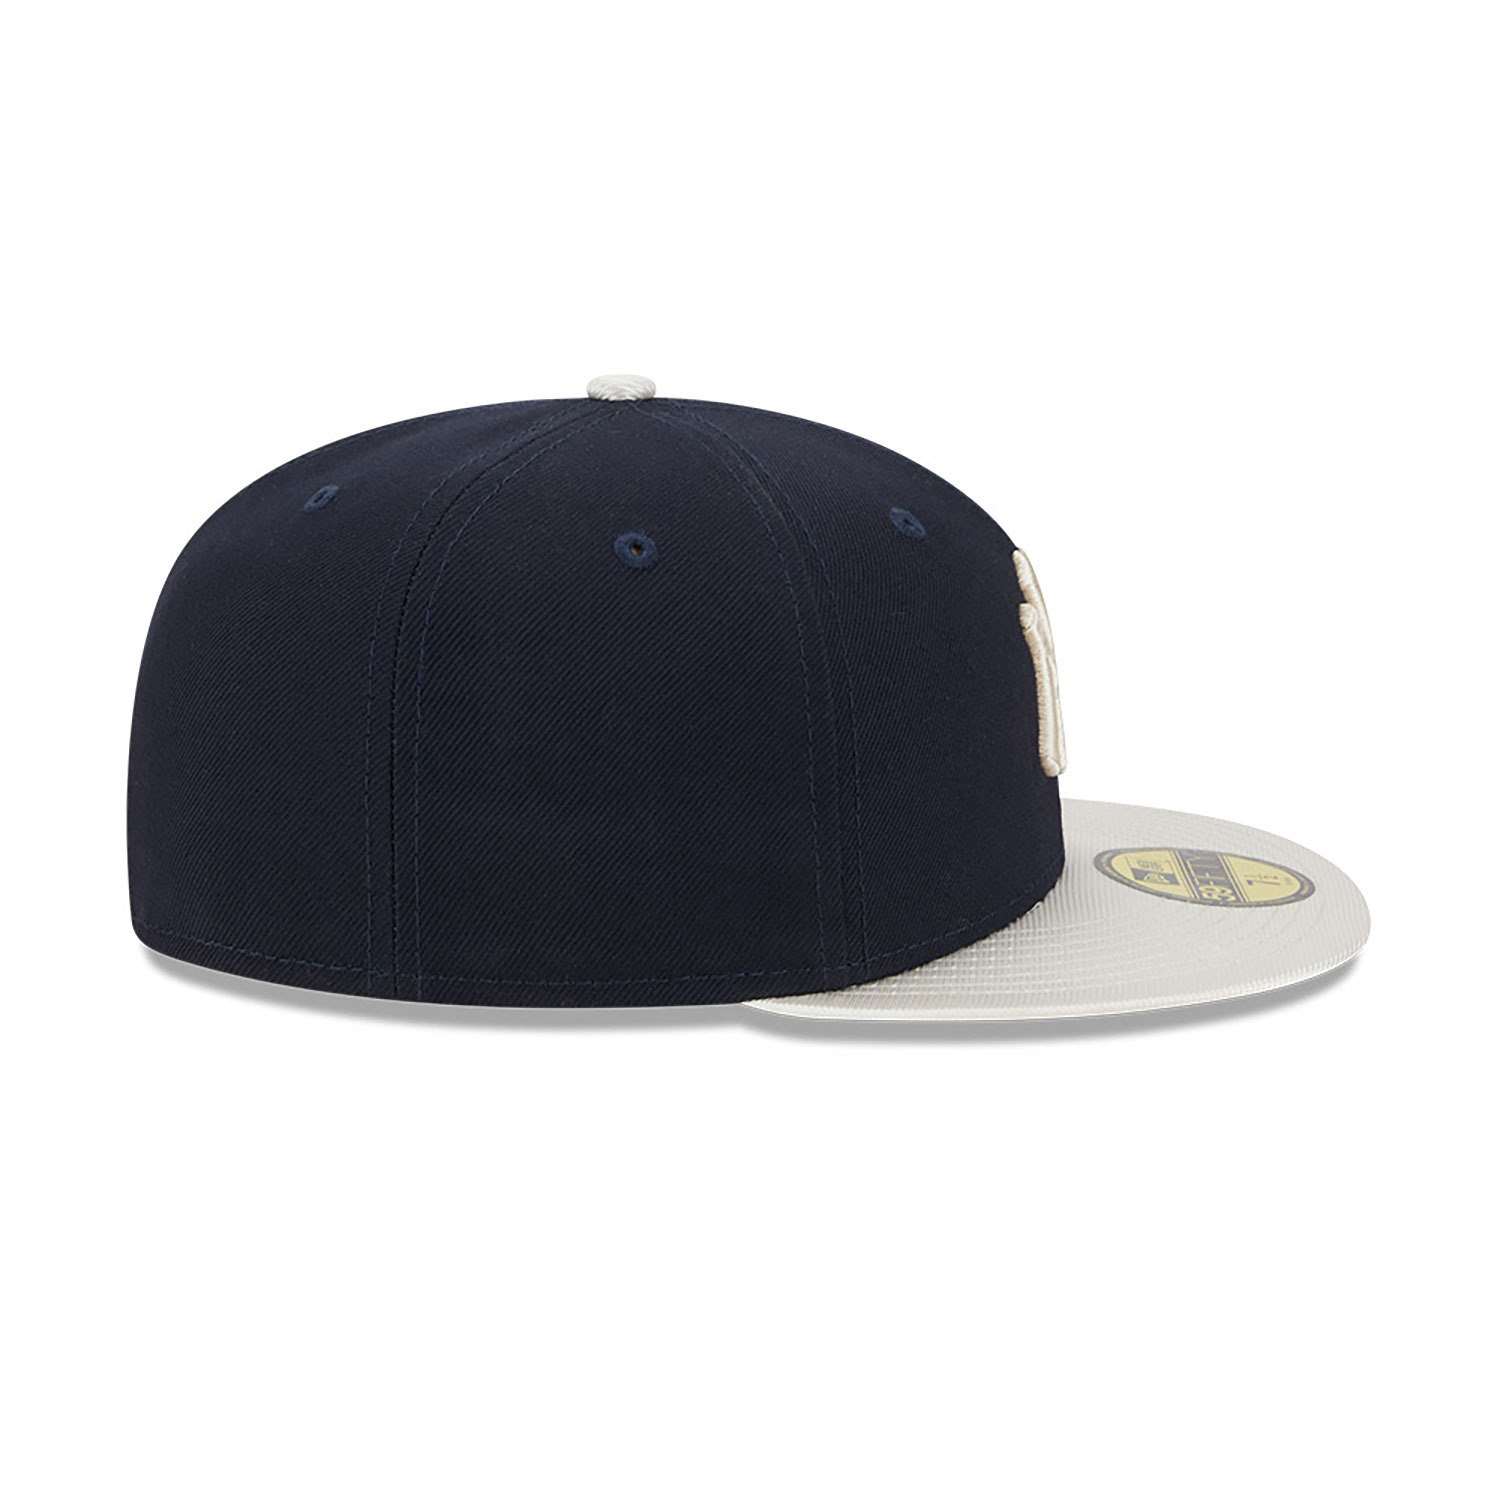 New York Yankees Team Shimmer Navy 59FIFTY Fitted Cap